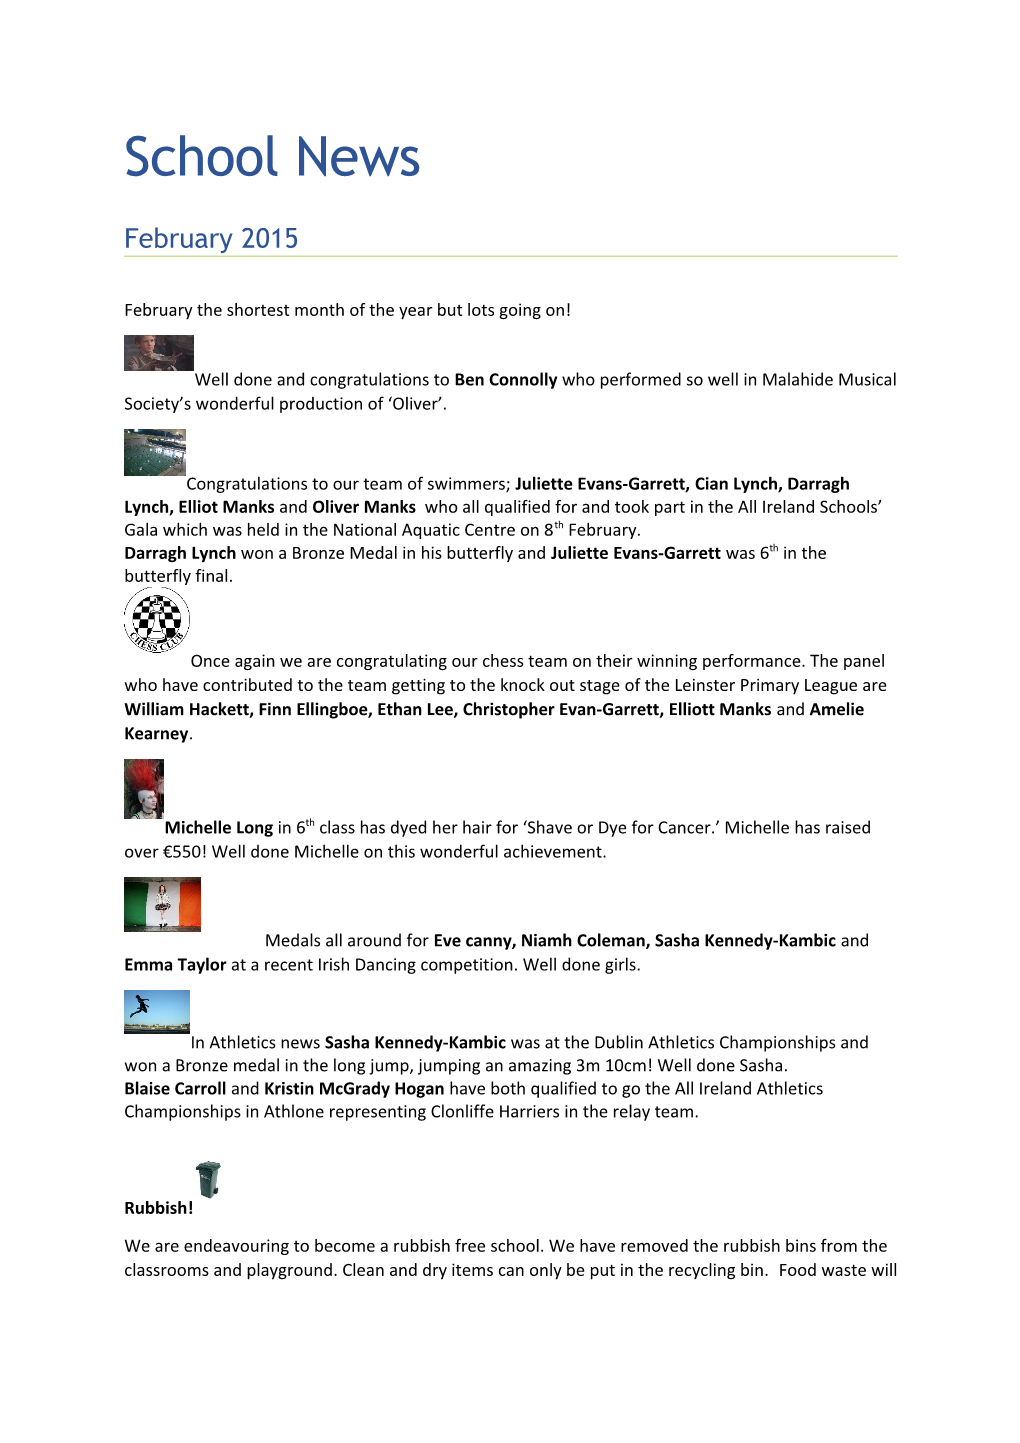 February the Shortest Month of the Year but Lots Going On!